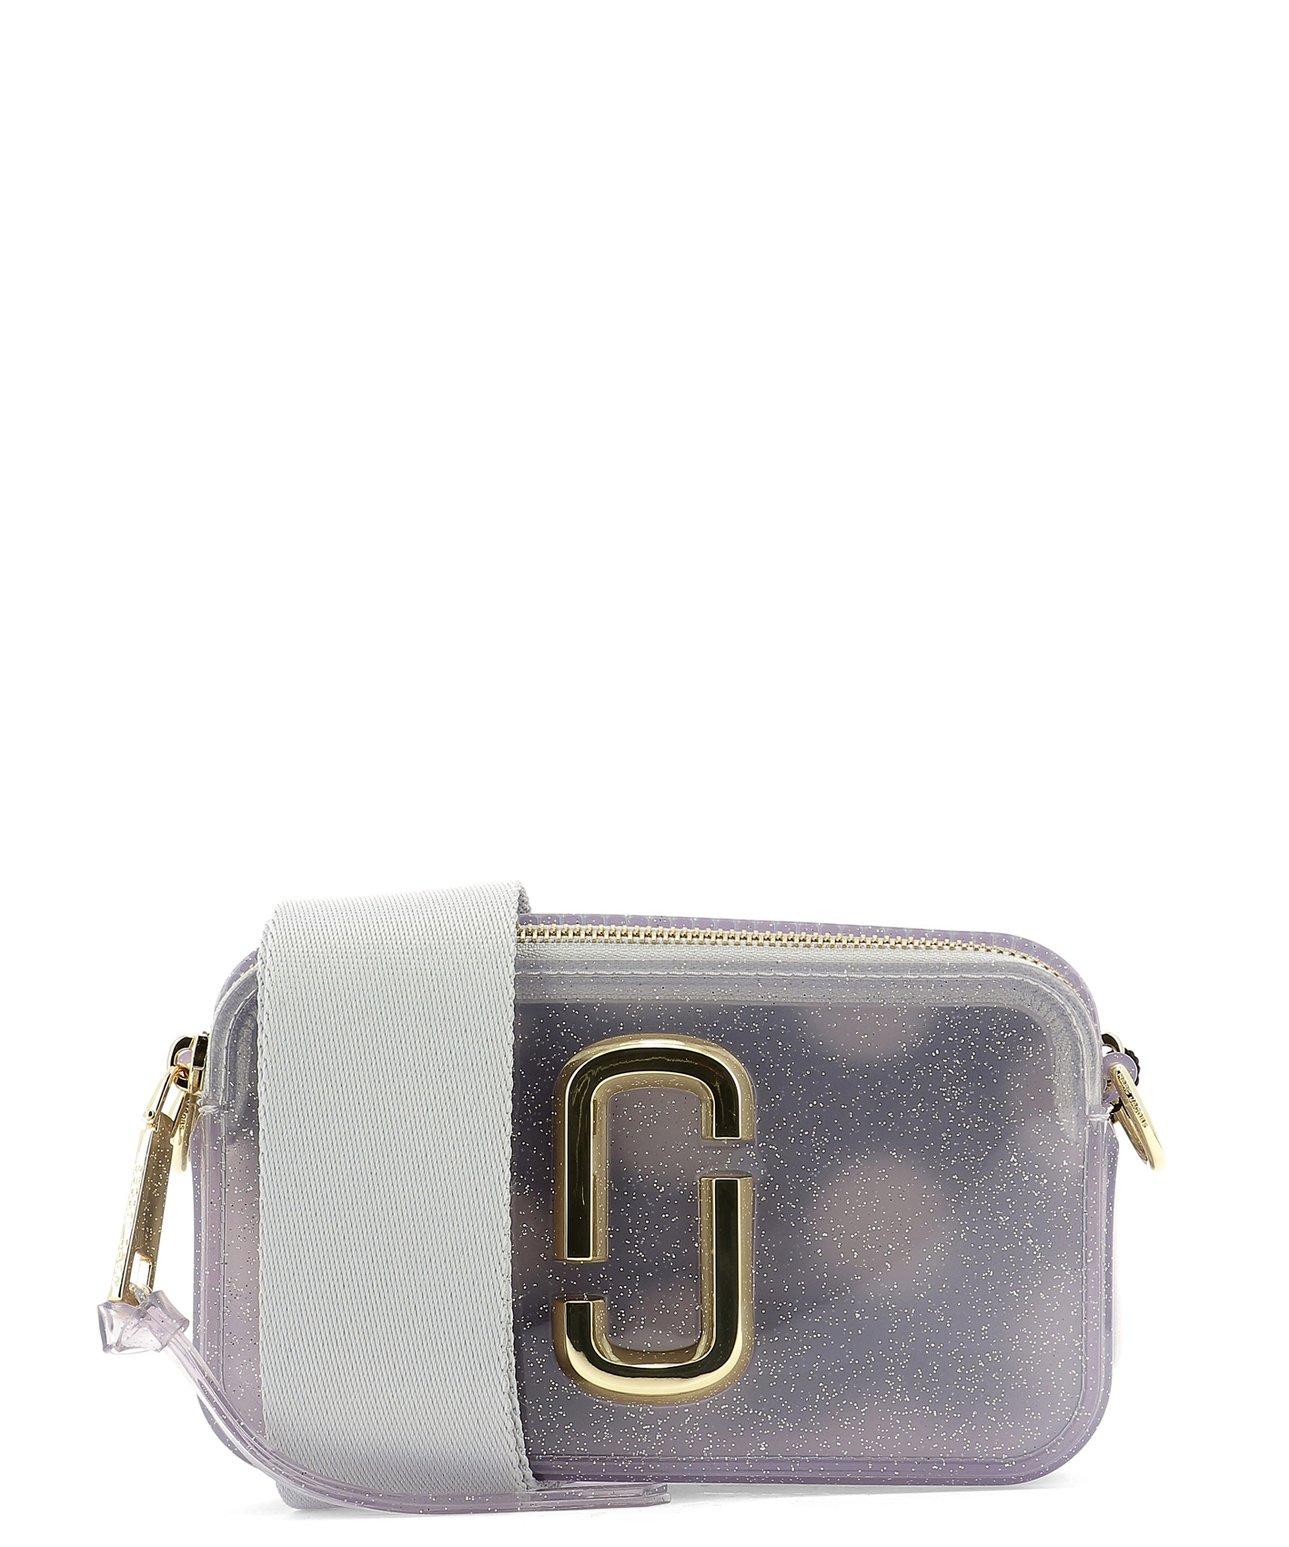 Marc Jacobs Jelly Glitter Snapshot Small Camera Bag in Pink - Lyst